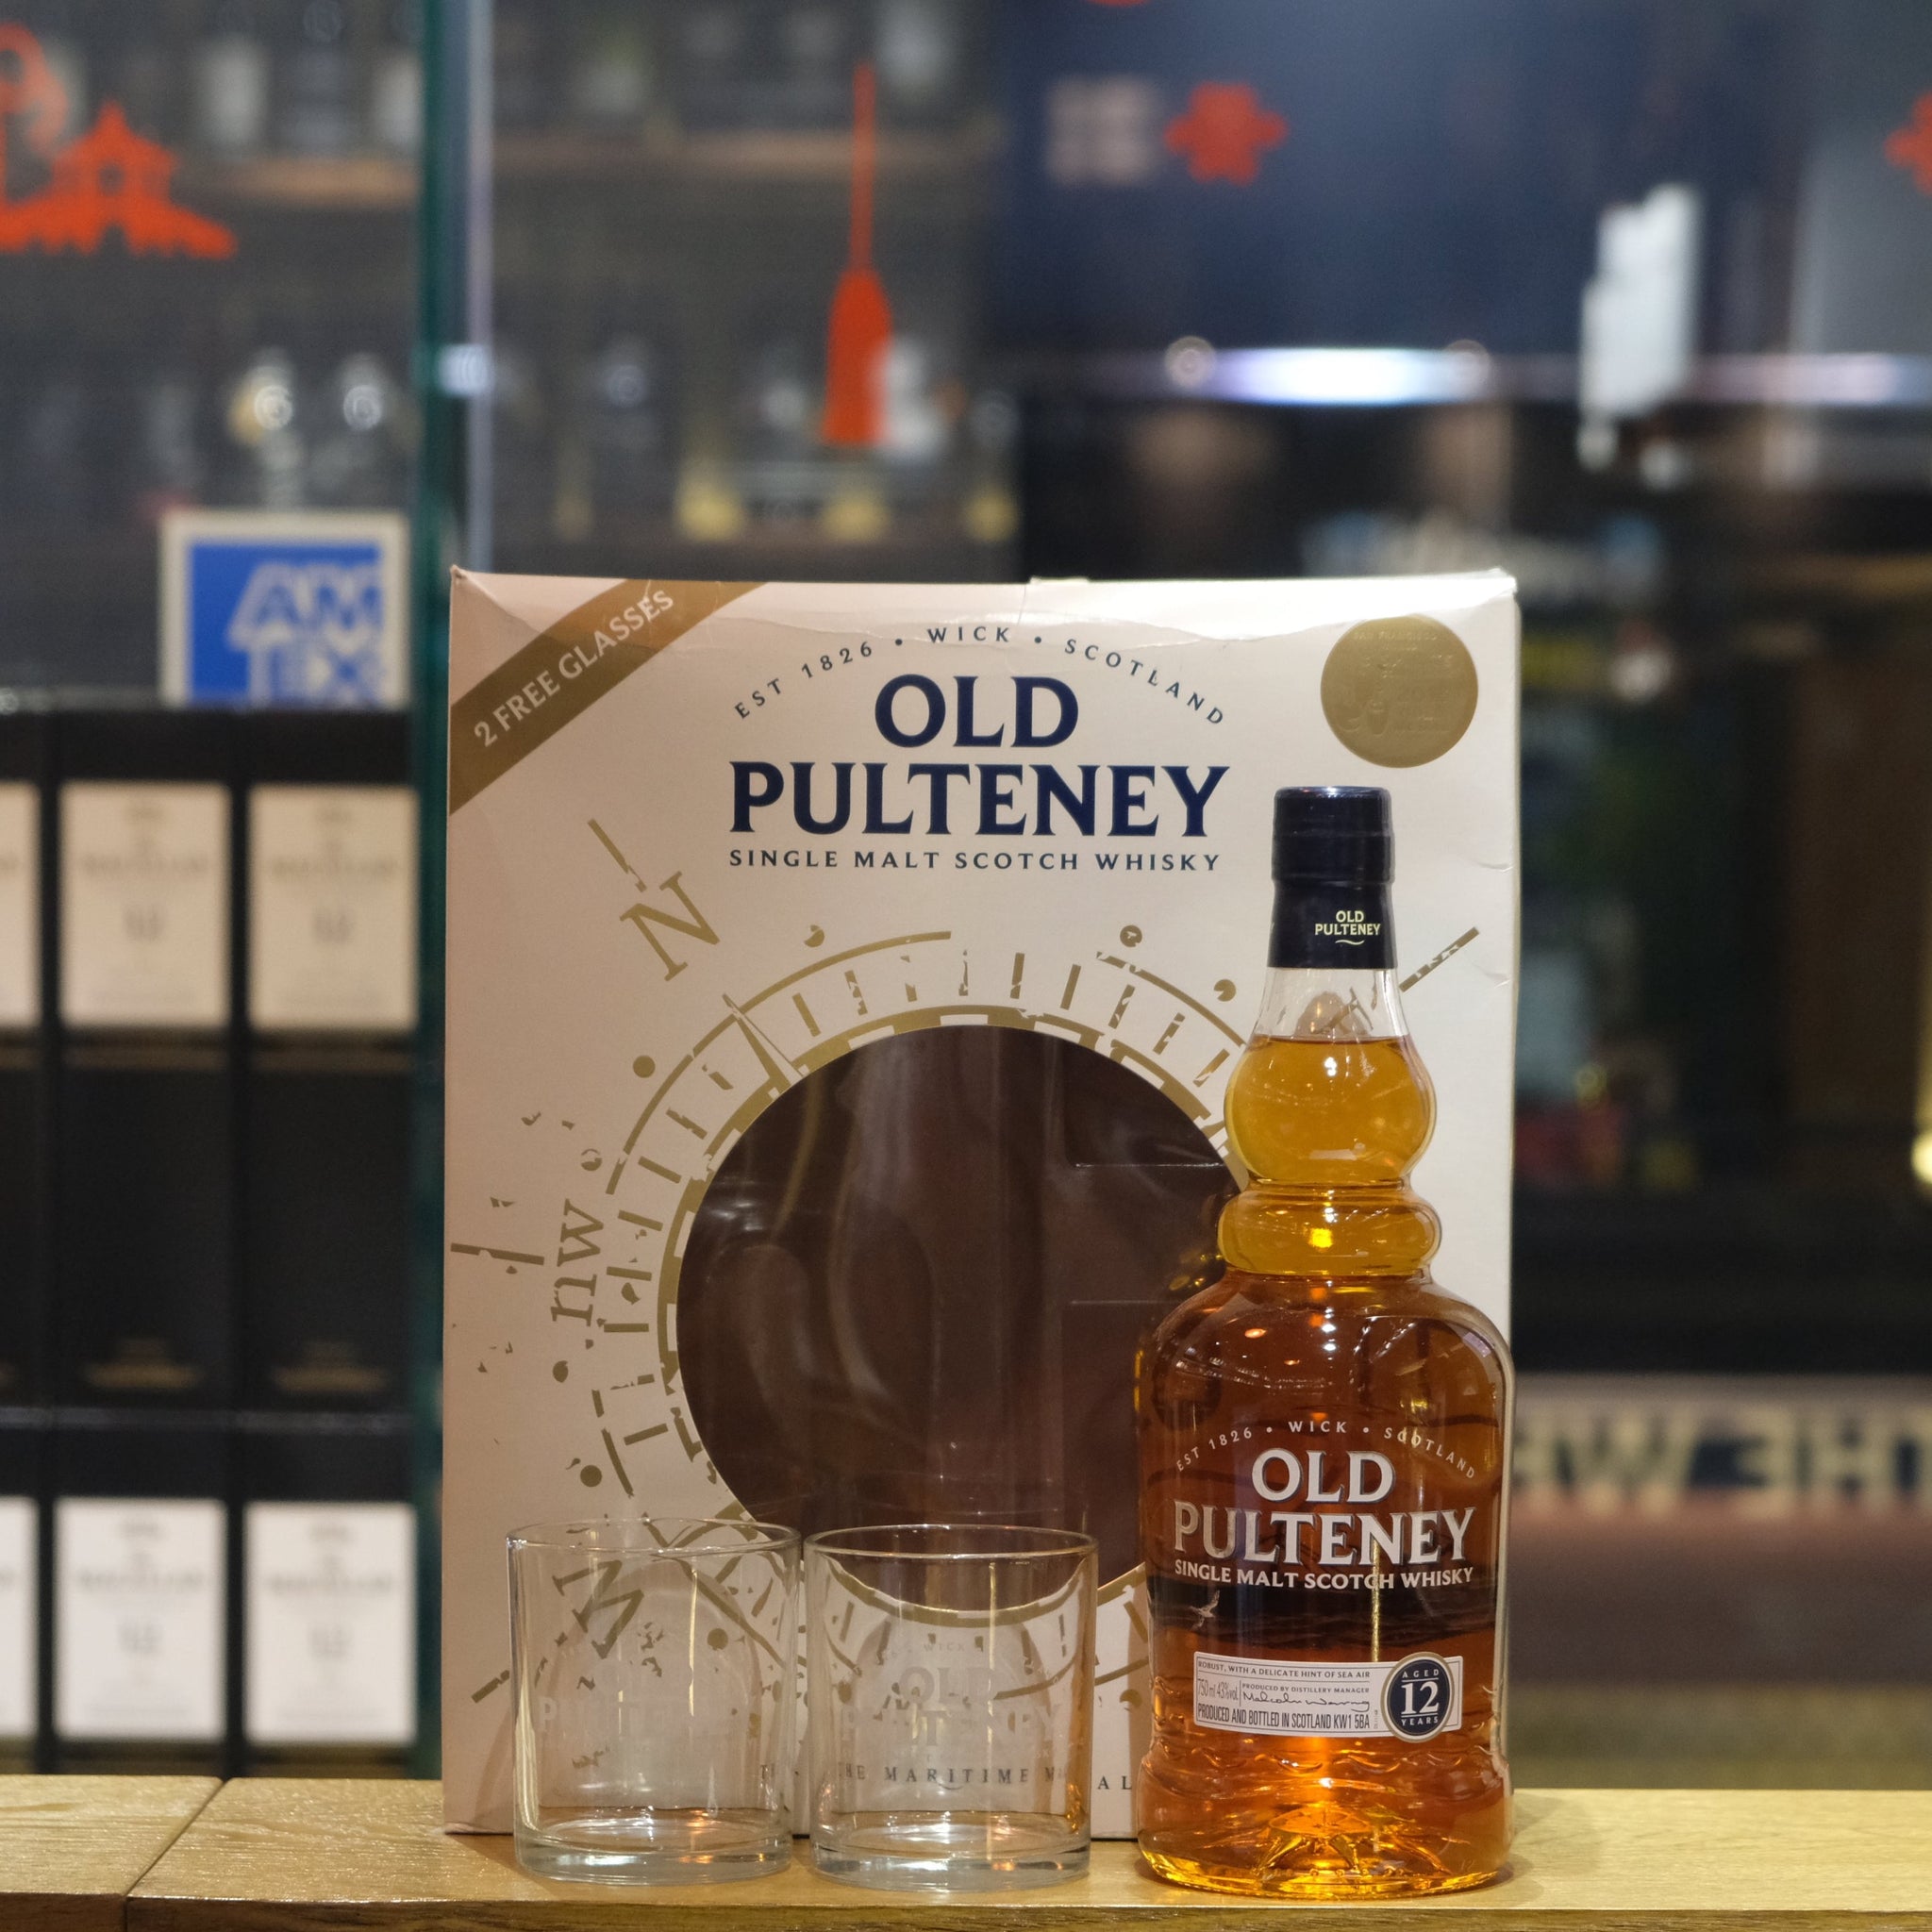 Old Pulteney 12 Year Old Gift Set with Glass Single Malt Scotch Whisky